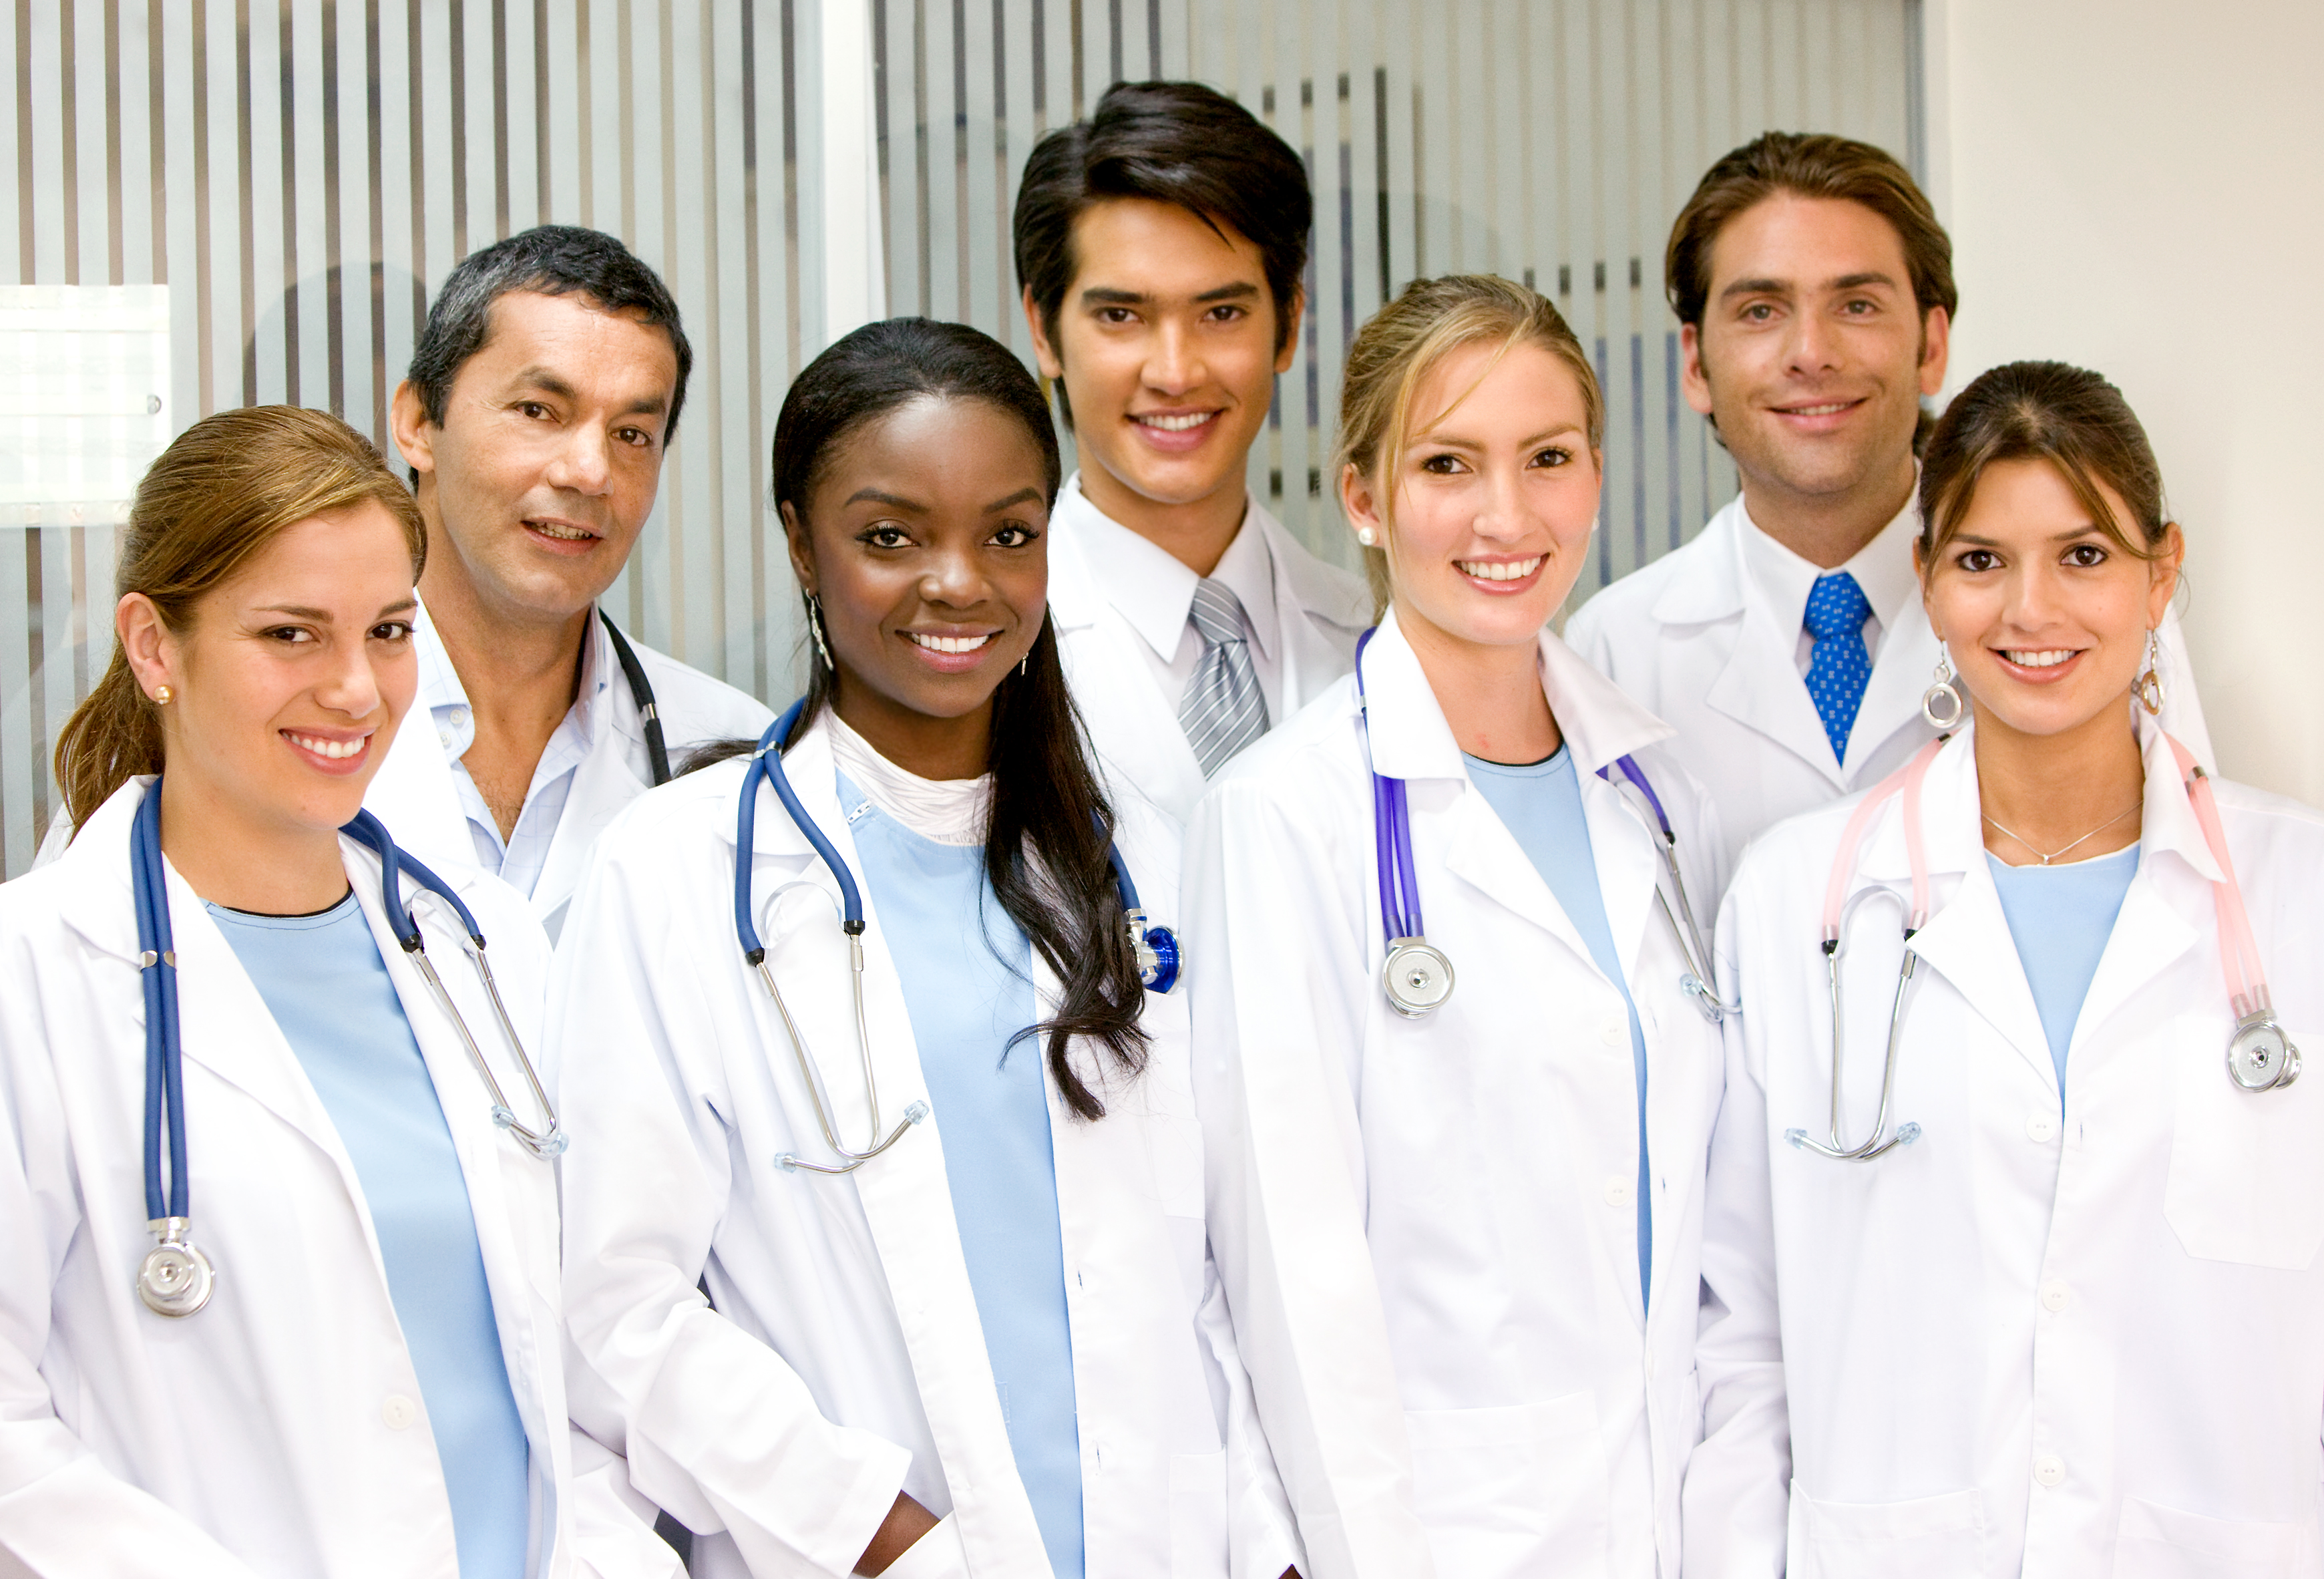 Looking for USA Residentship – Study MD with Clinical Rotations in USA